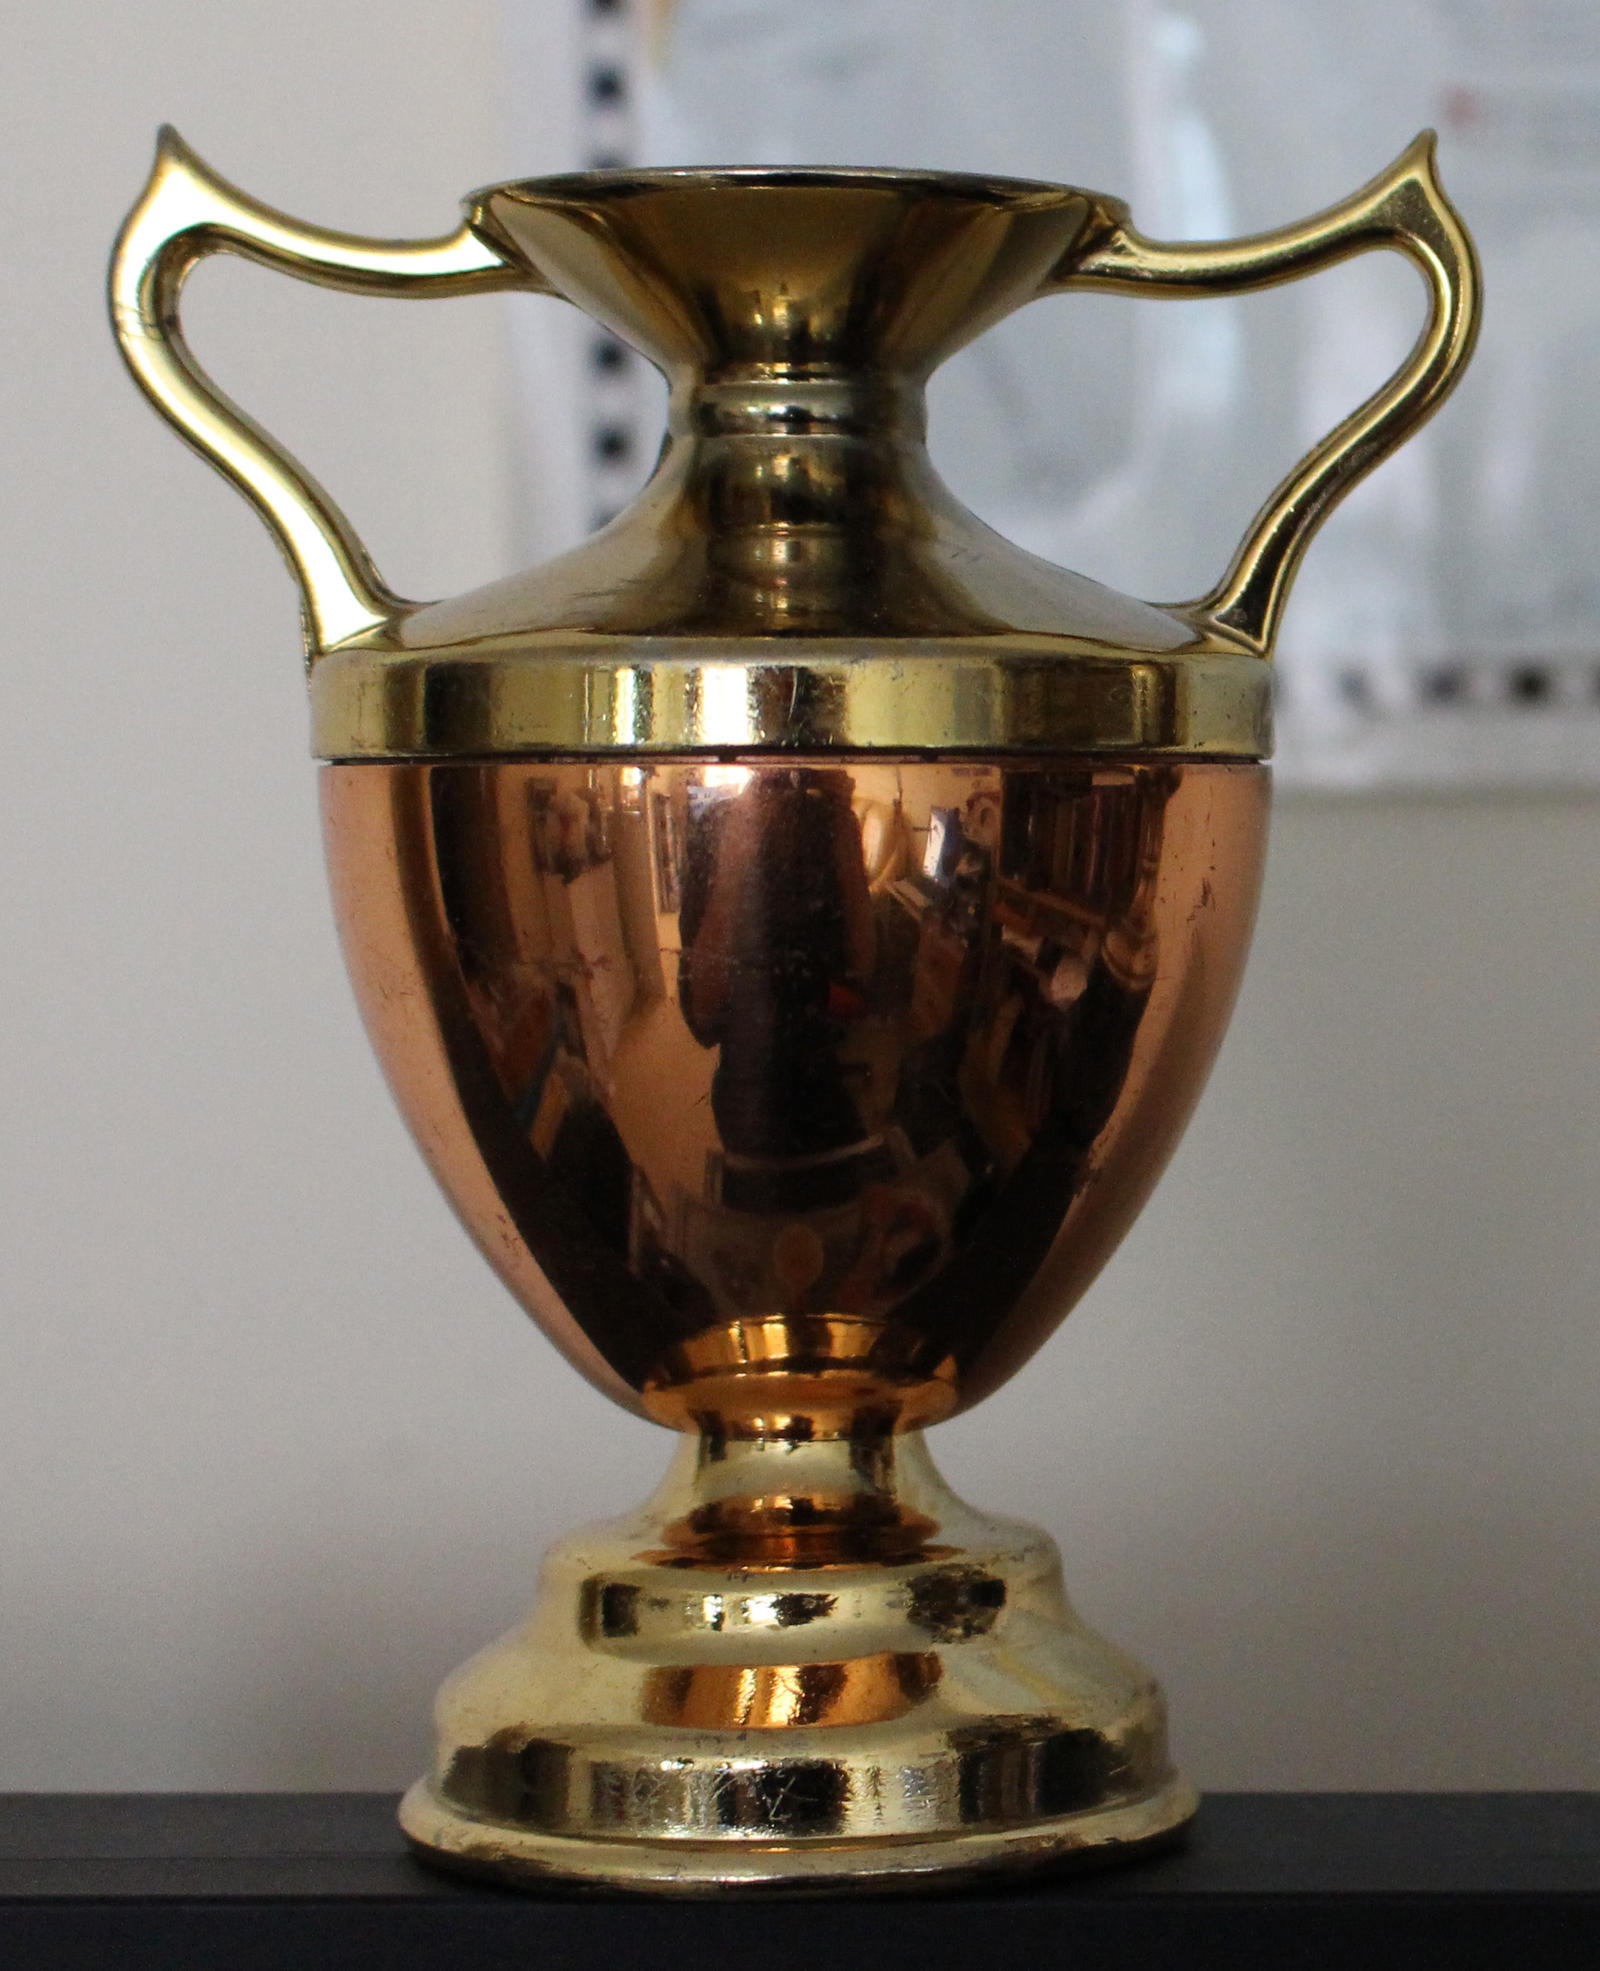 Trophy 2 - (white background)